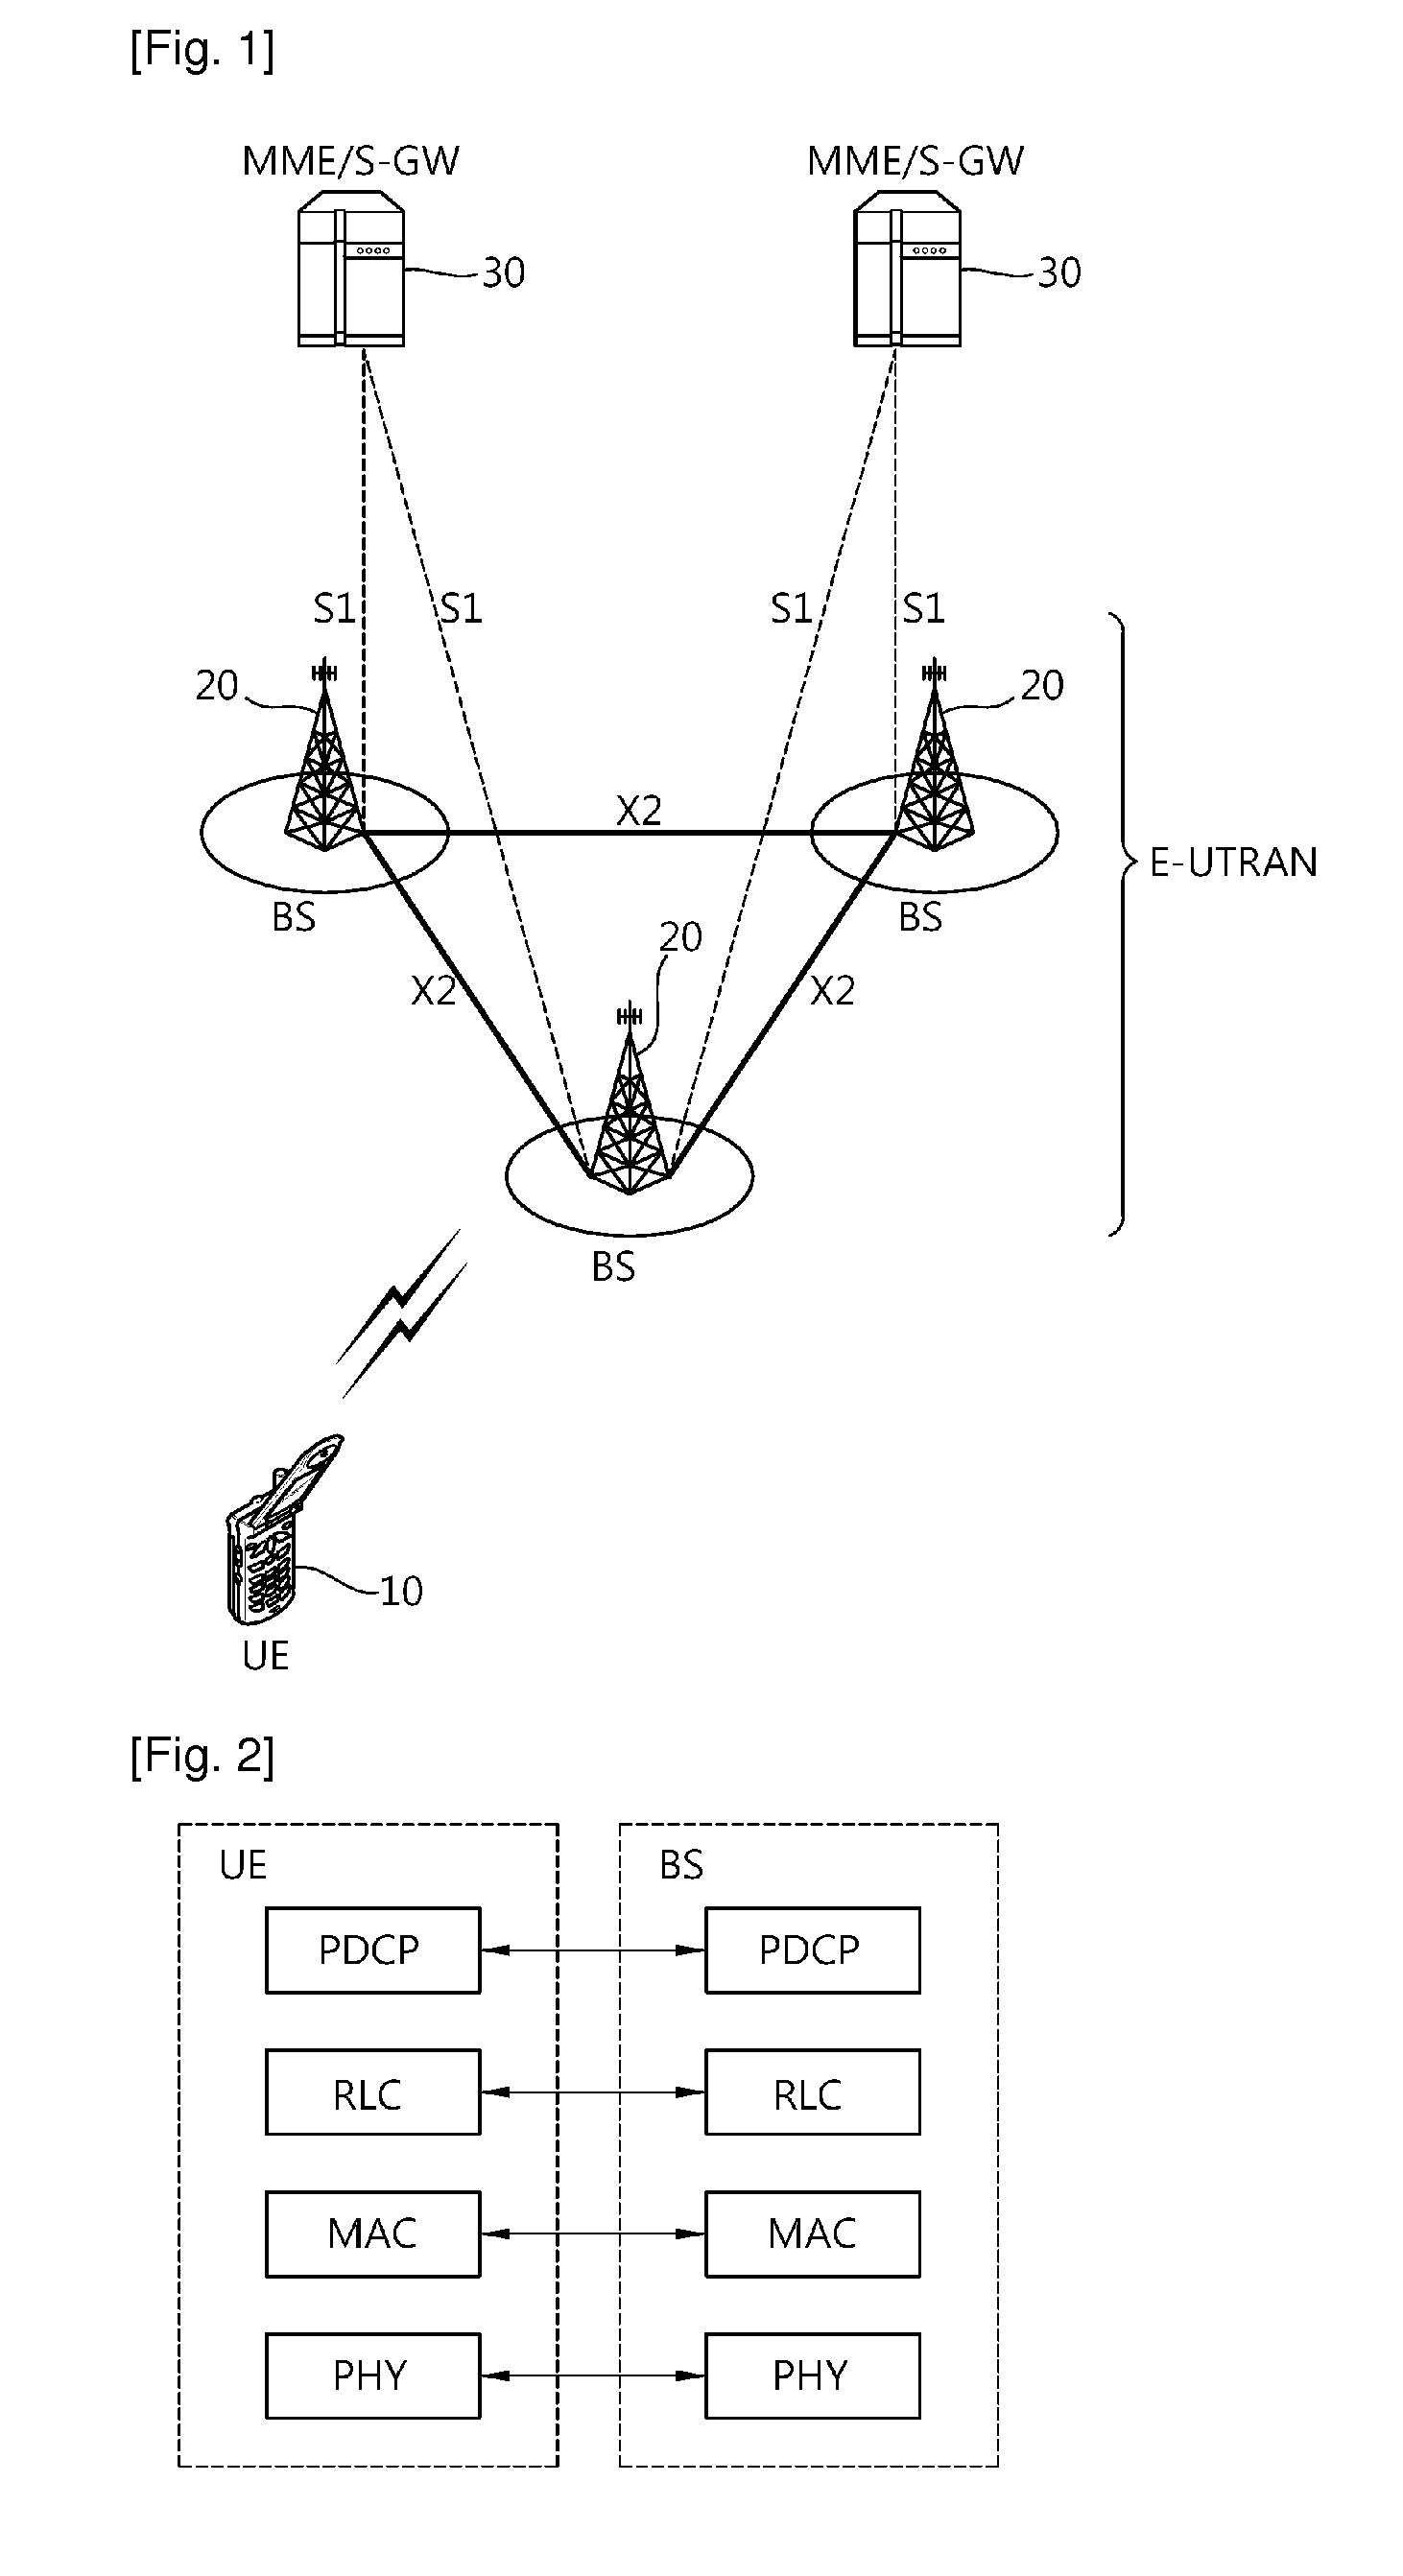 Method and apparatus for reporting pdcp status